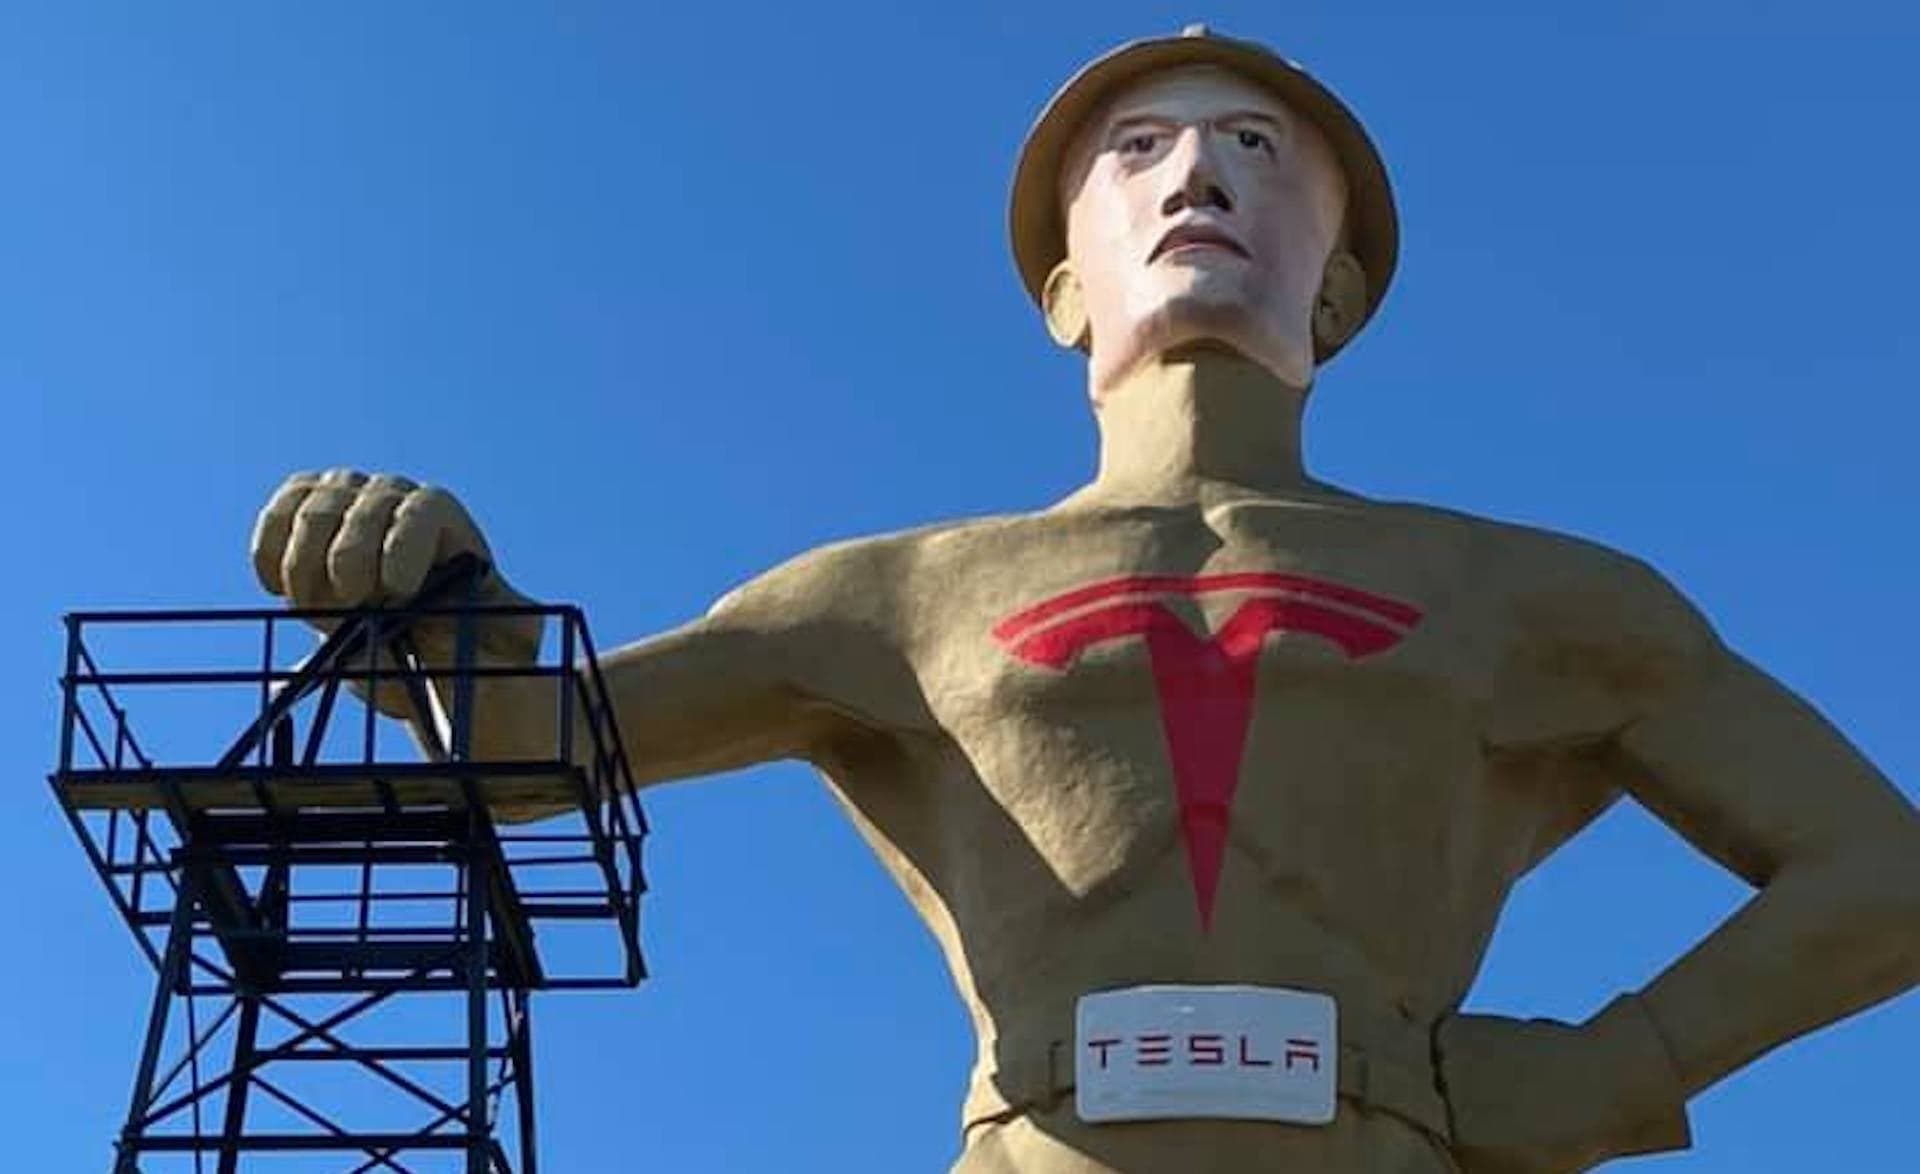 Tulsa Paints Elon Musk’s Face on Its Giant Golden Driller Statue in Hopes of Luring Next Tesla Plant